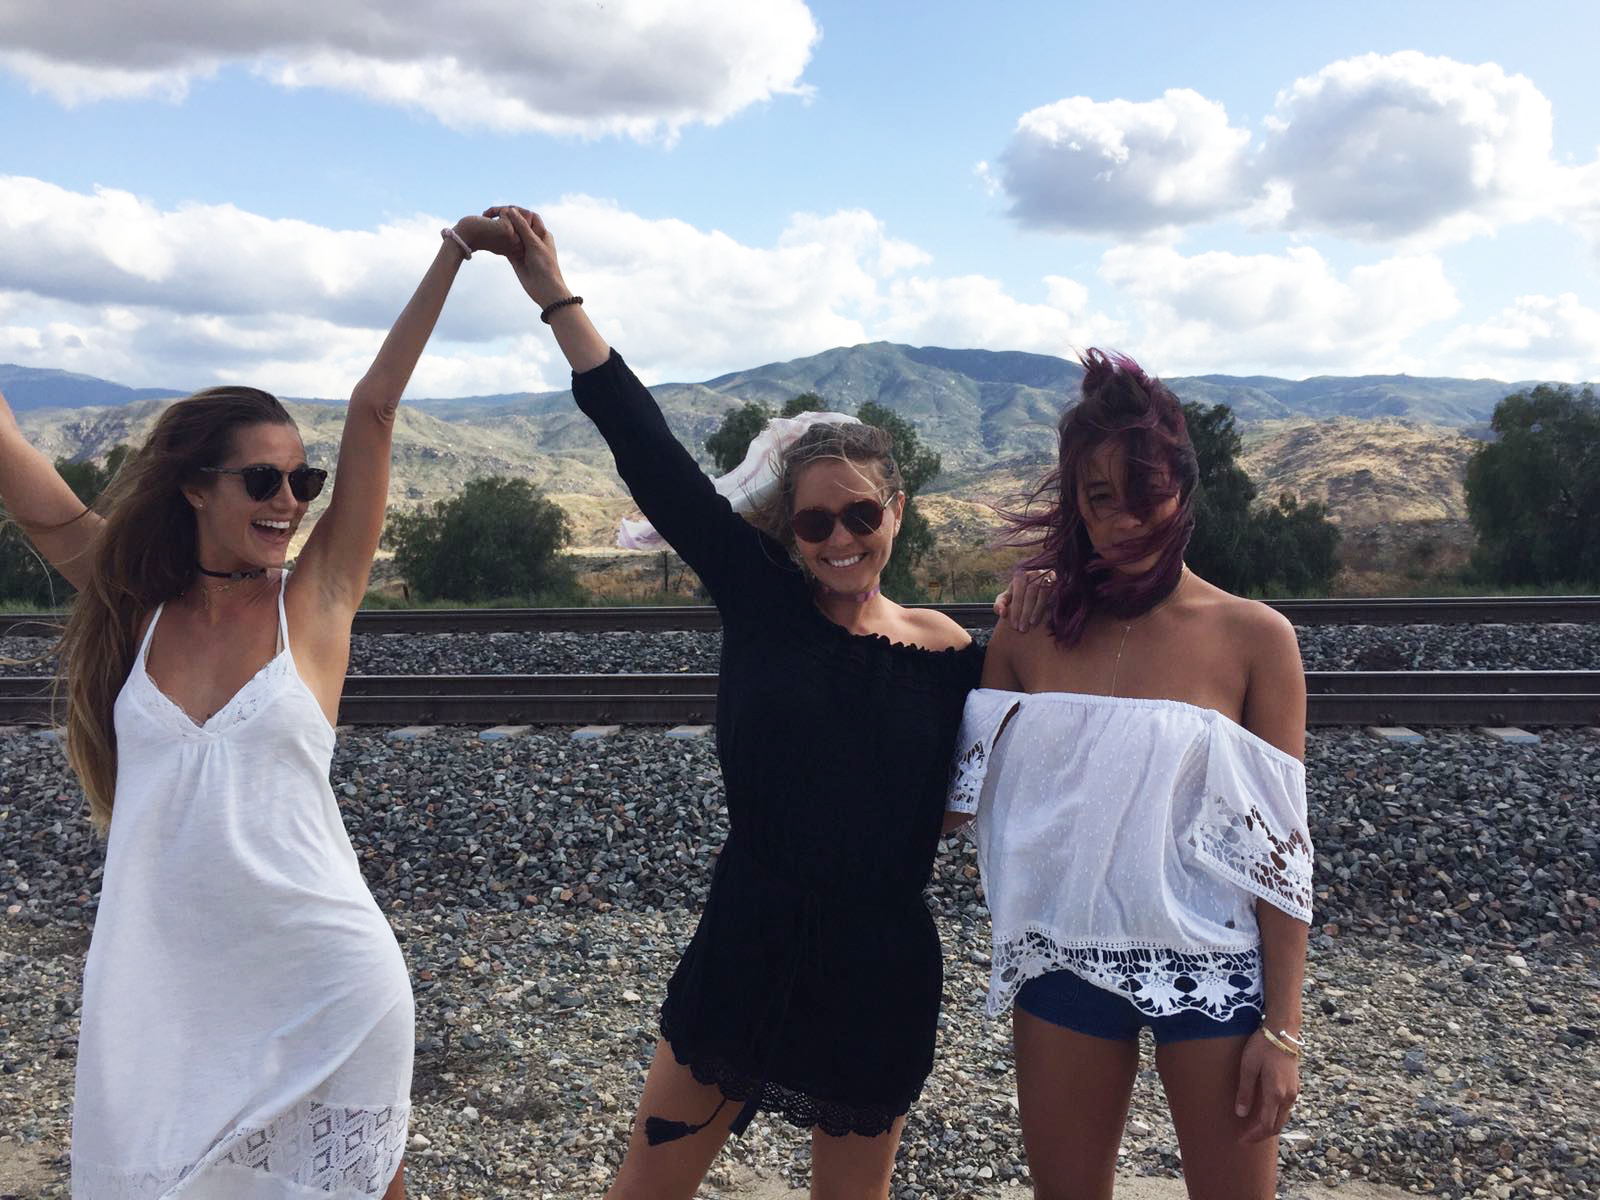 Road Tripping to Palm Springs with Kelia, Monyca and Bruna